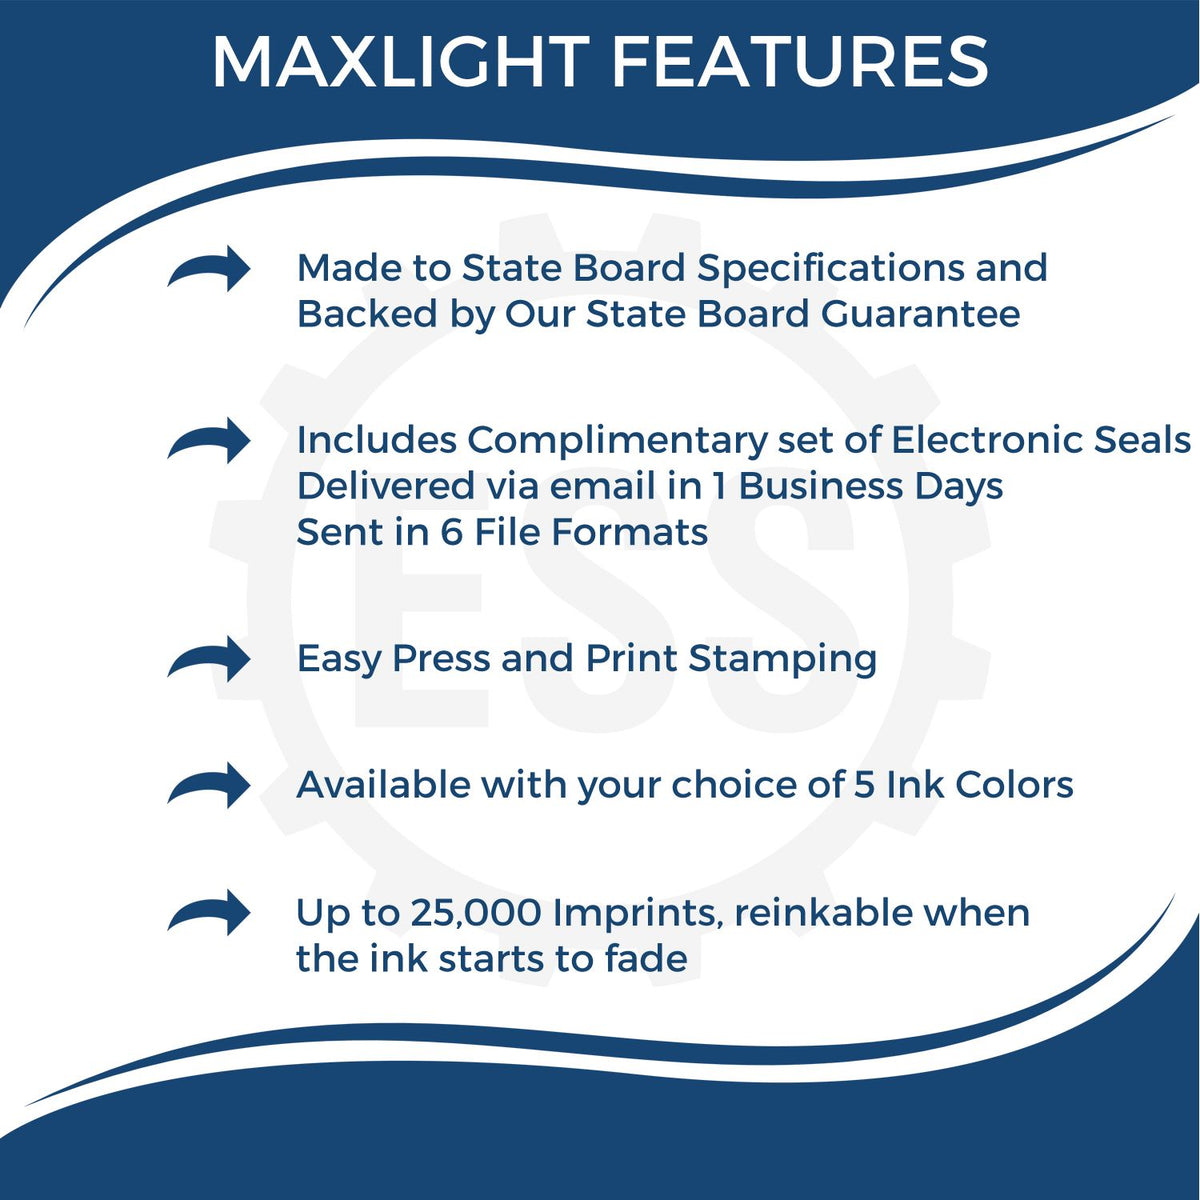 A picture of an infographic highlighting the selling points for the MaxLight Premium Pre-Inked Pennsylvania Rectangular Notarial Stamp